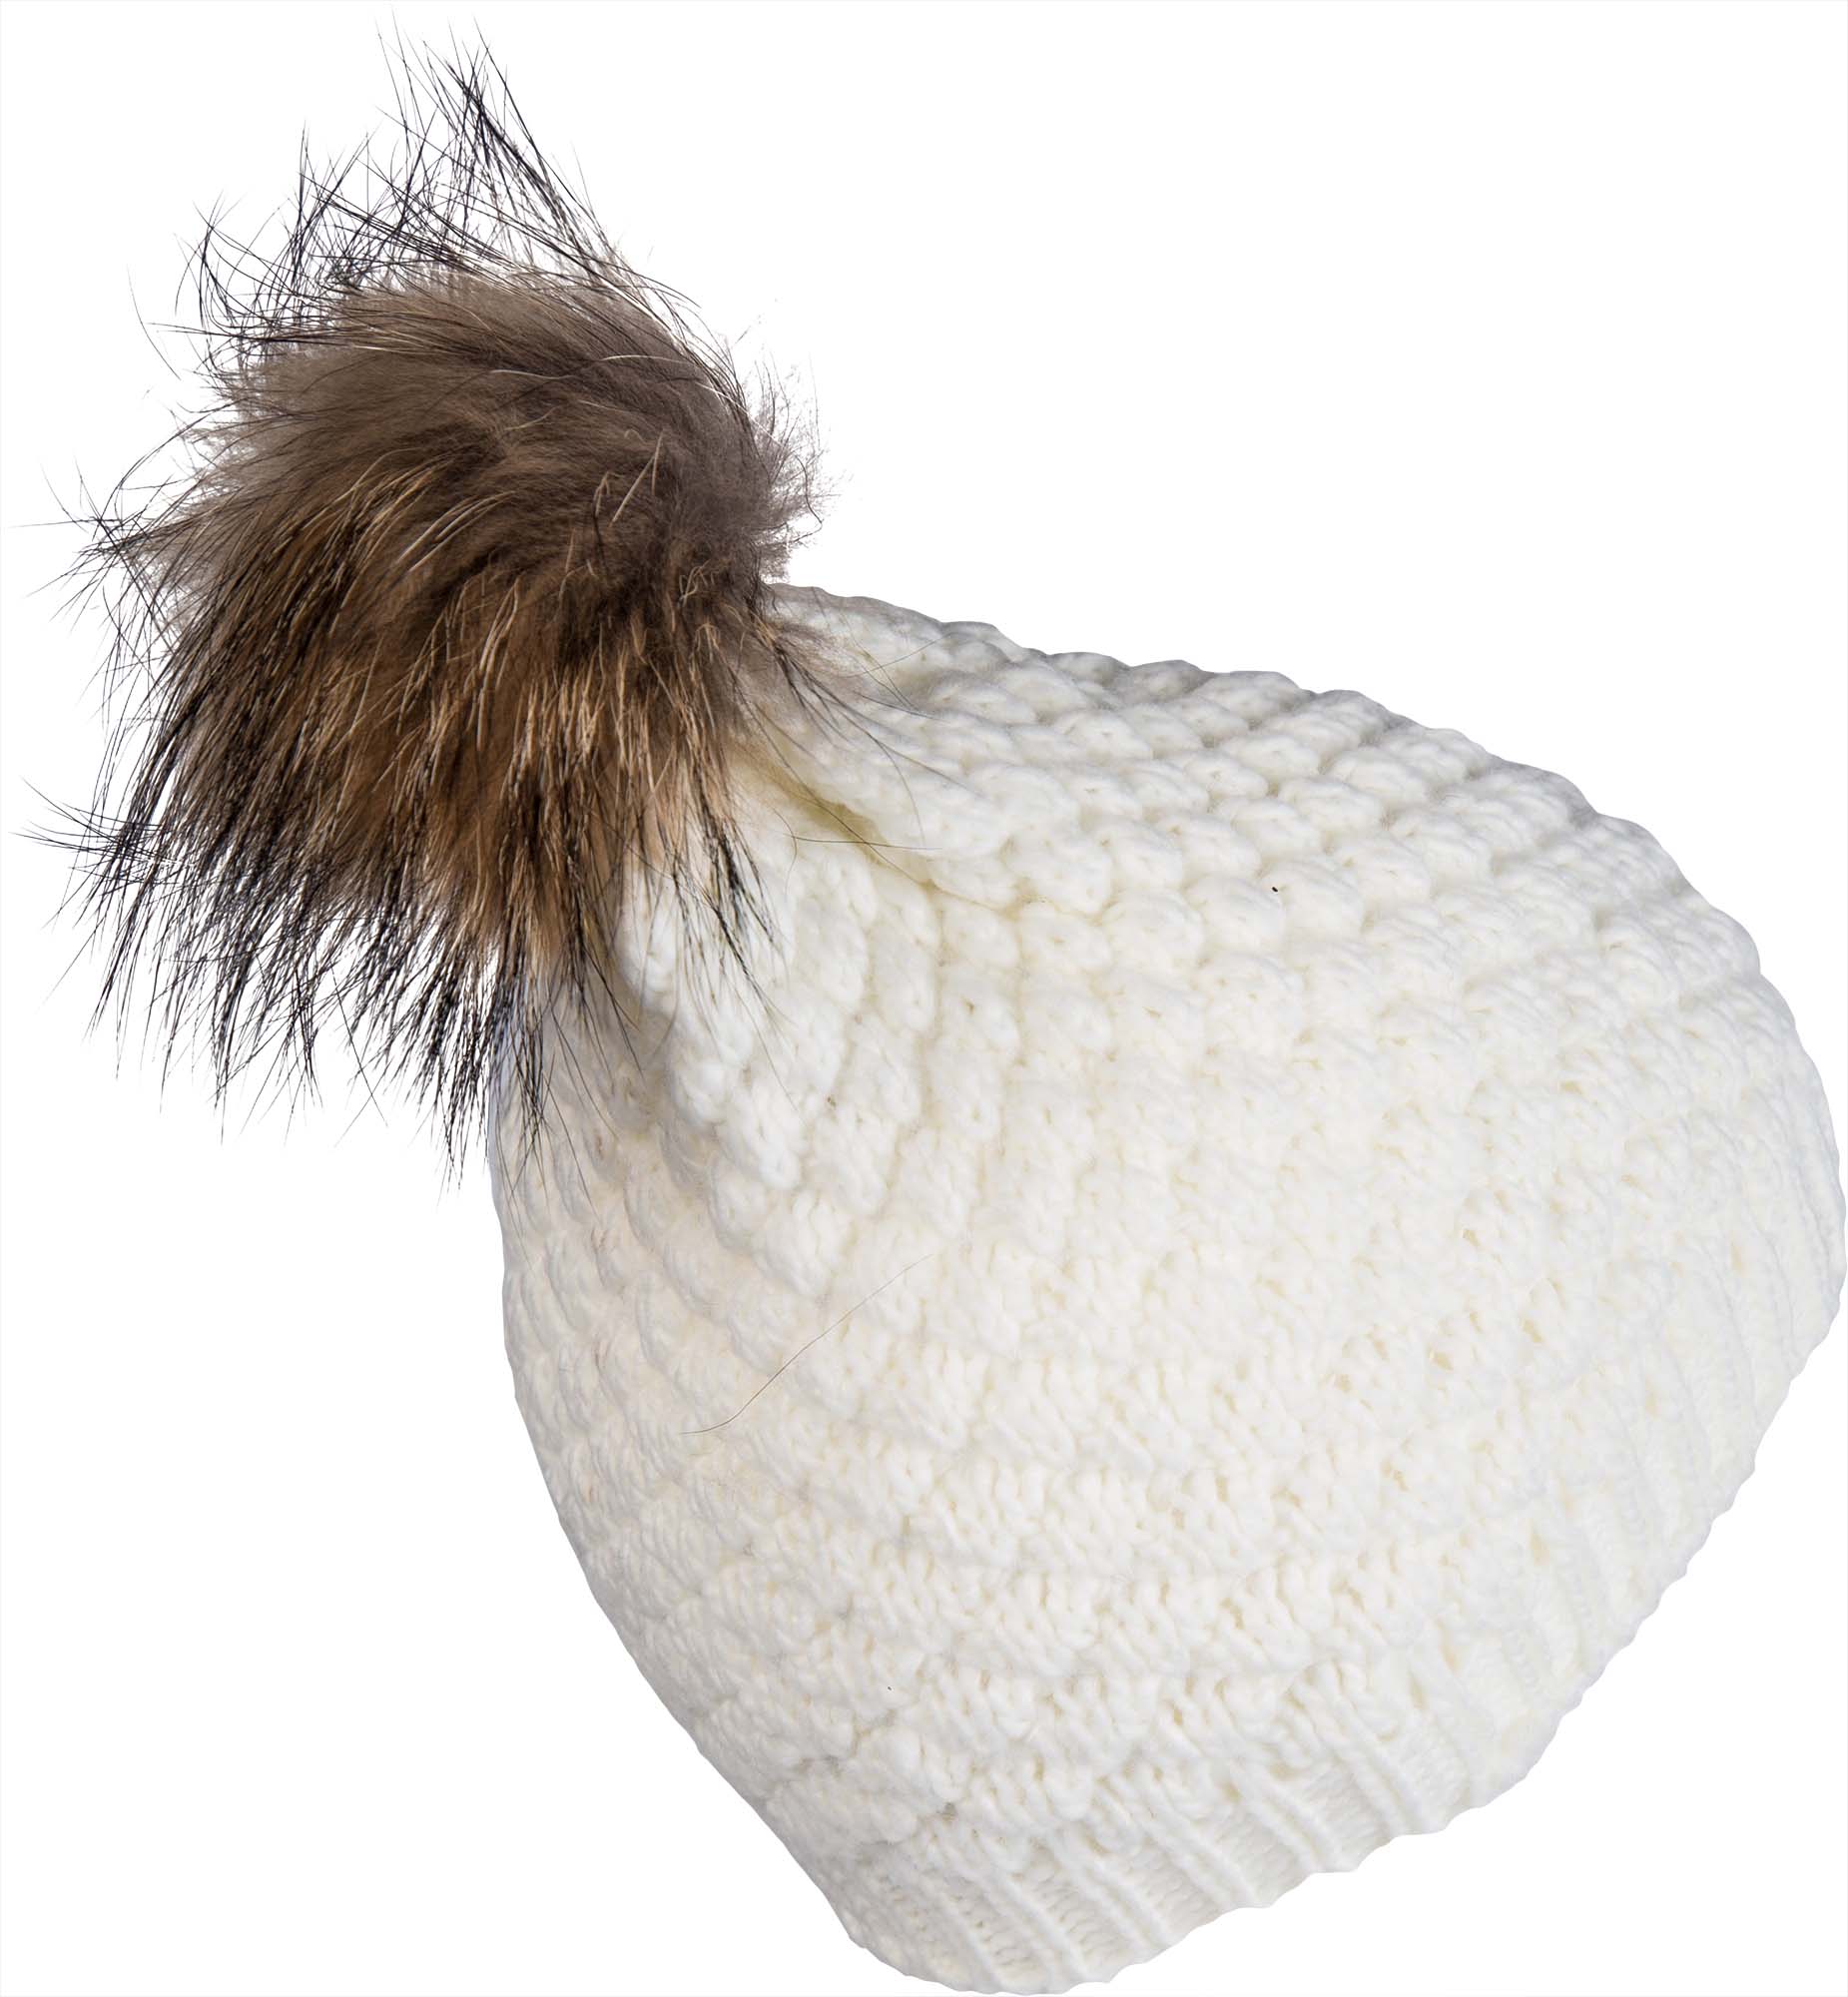 Women’s knitted hat